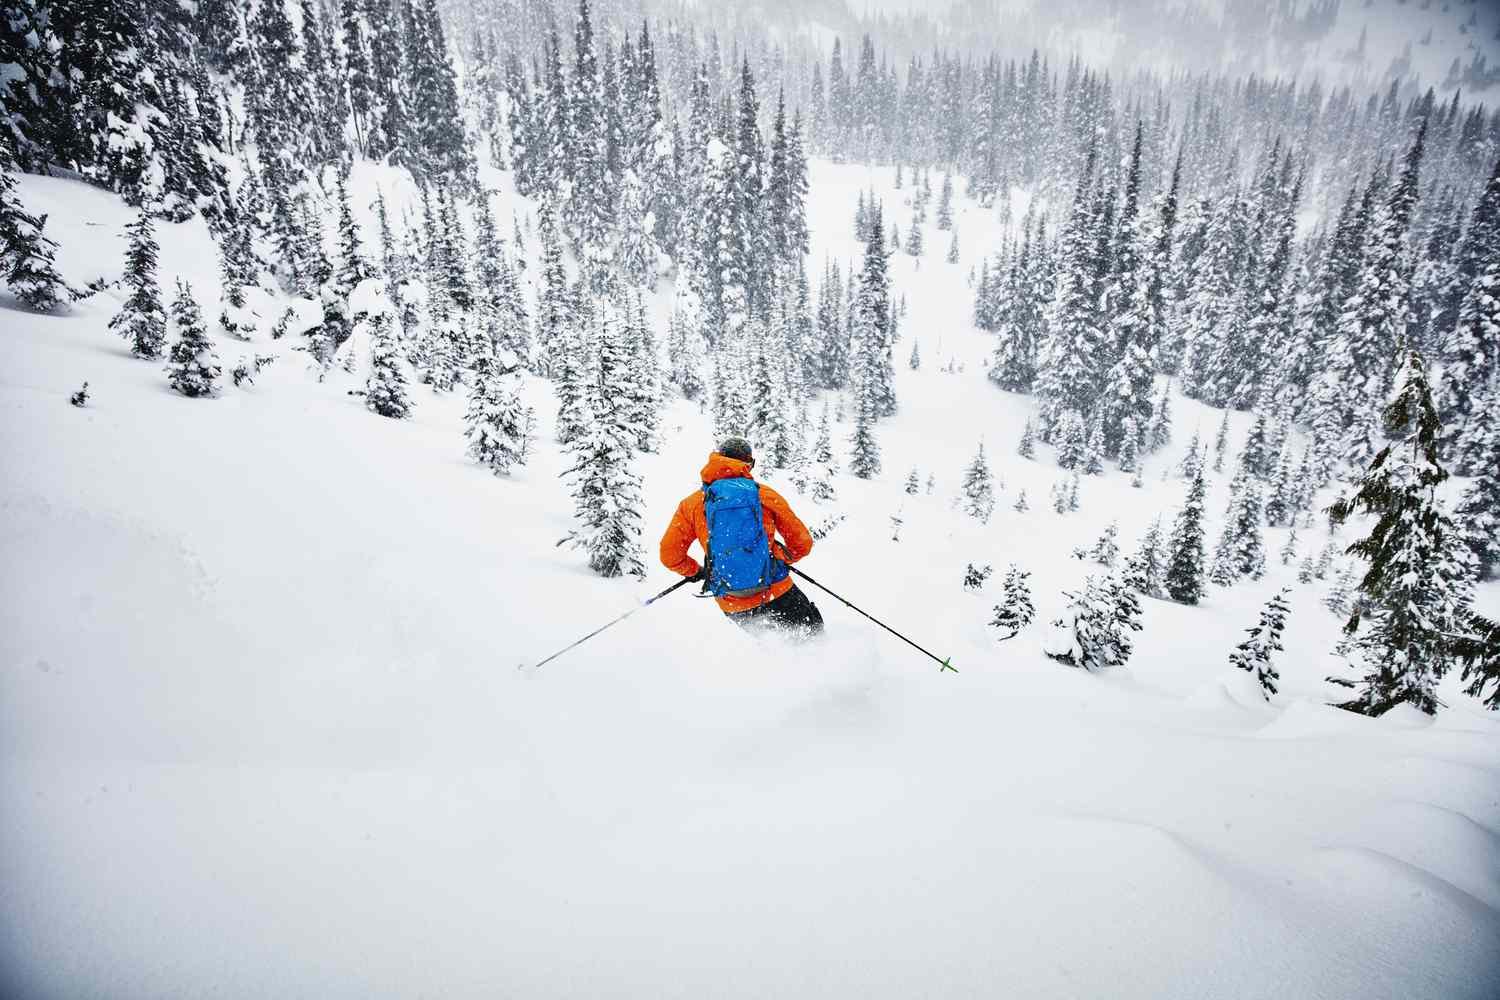 The 25 Best Ski Destinations in the United States